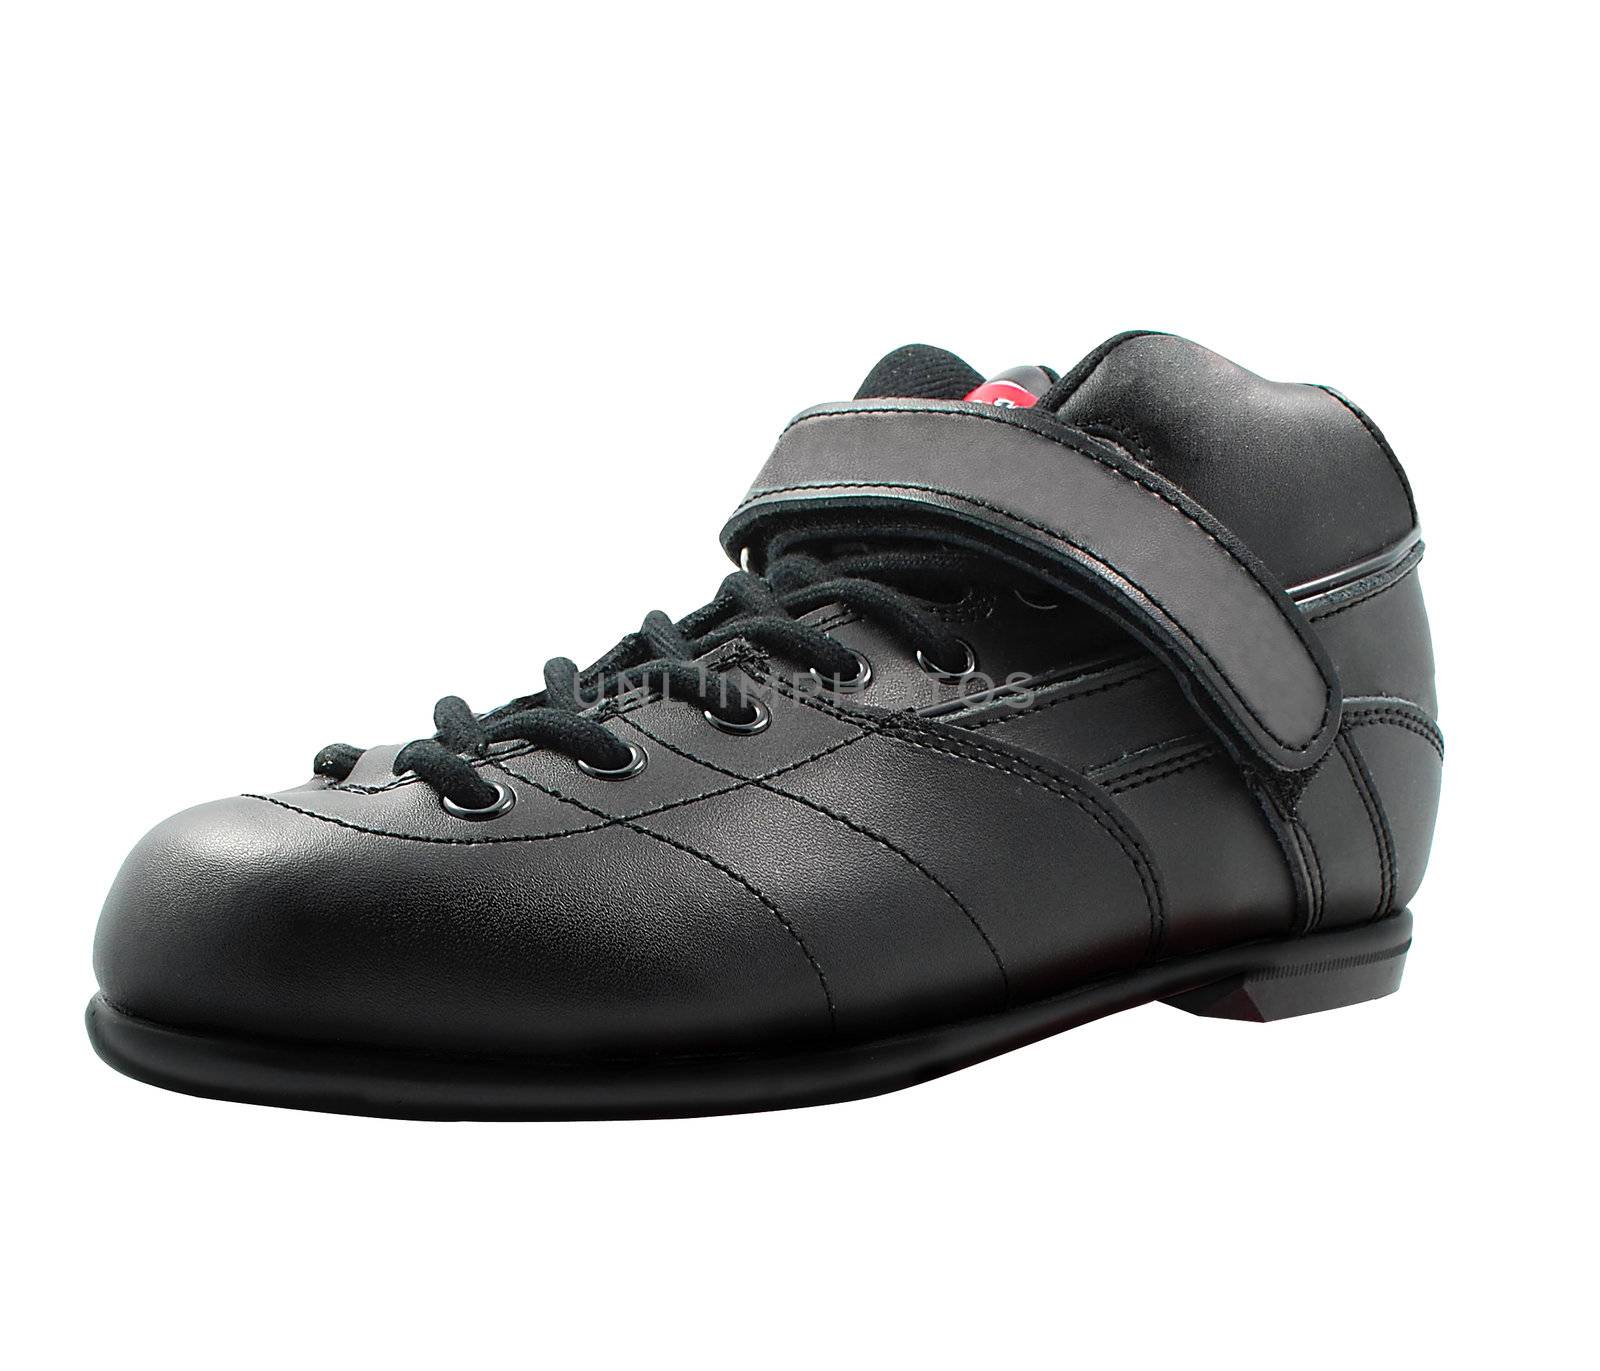 black lace-up shoe made of leather